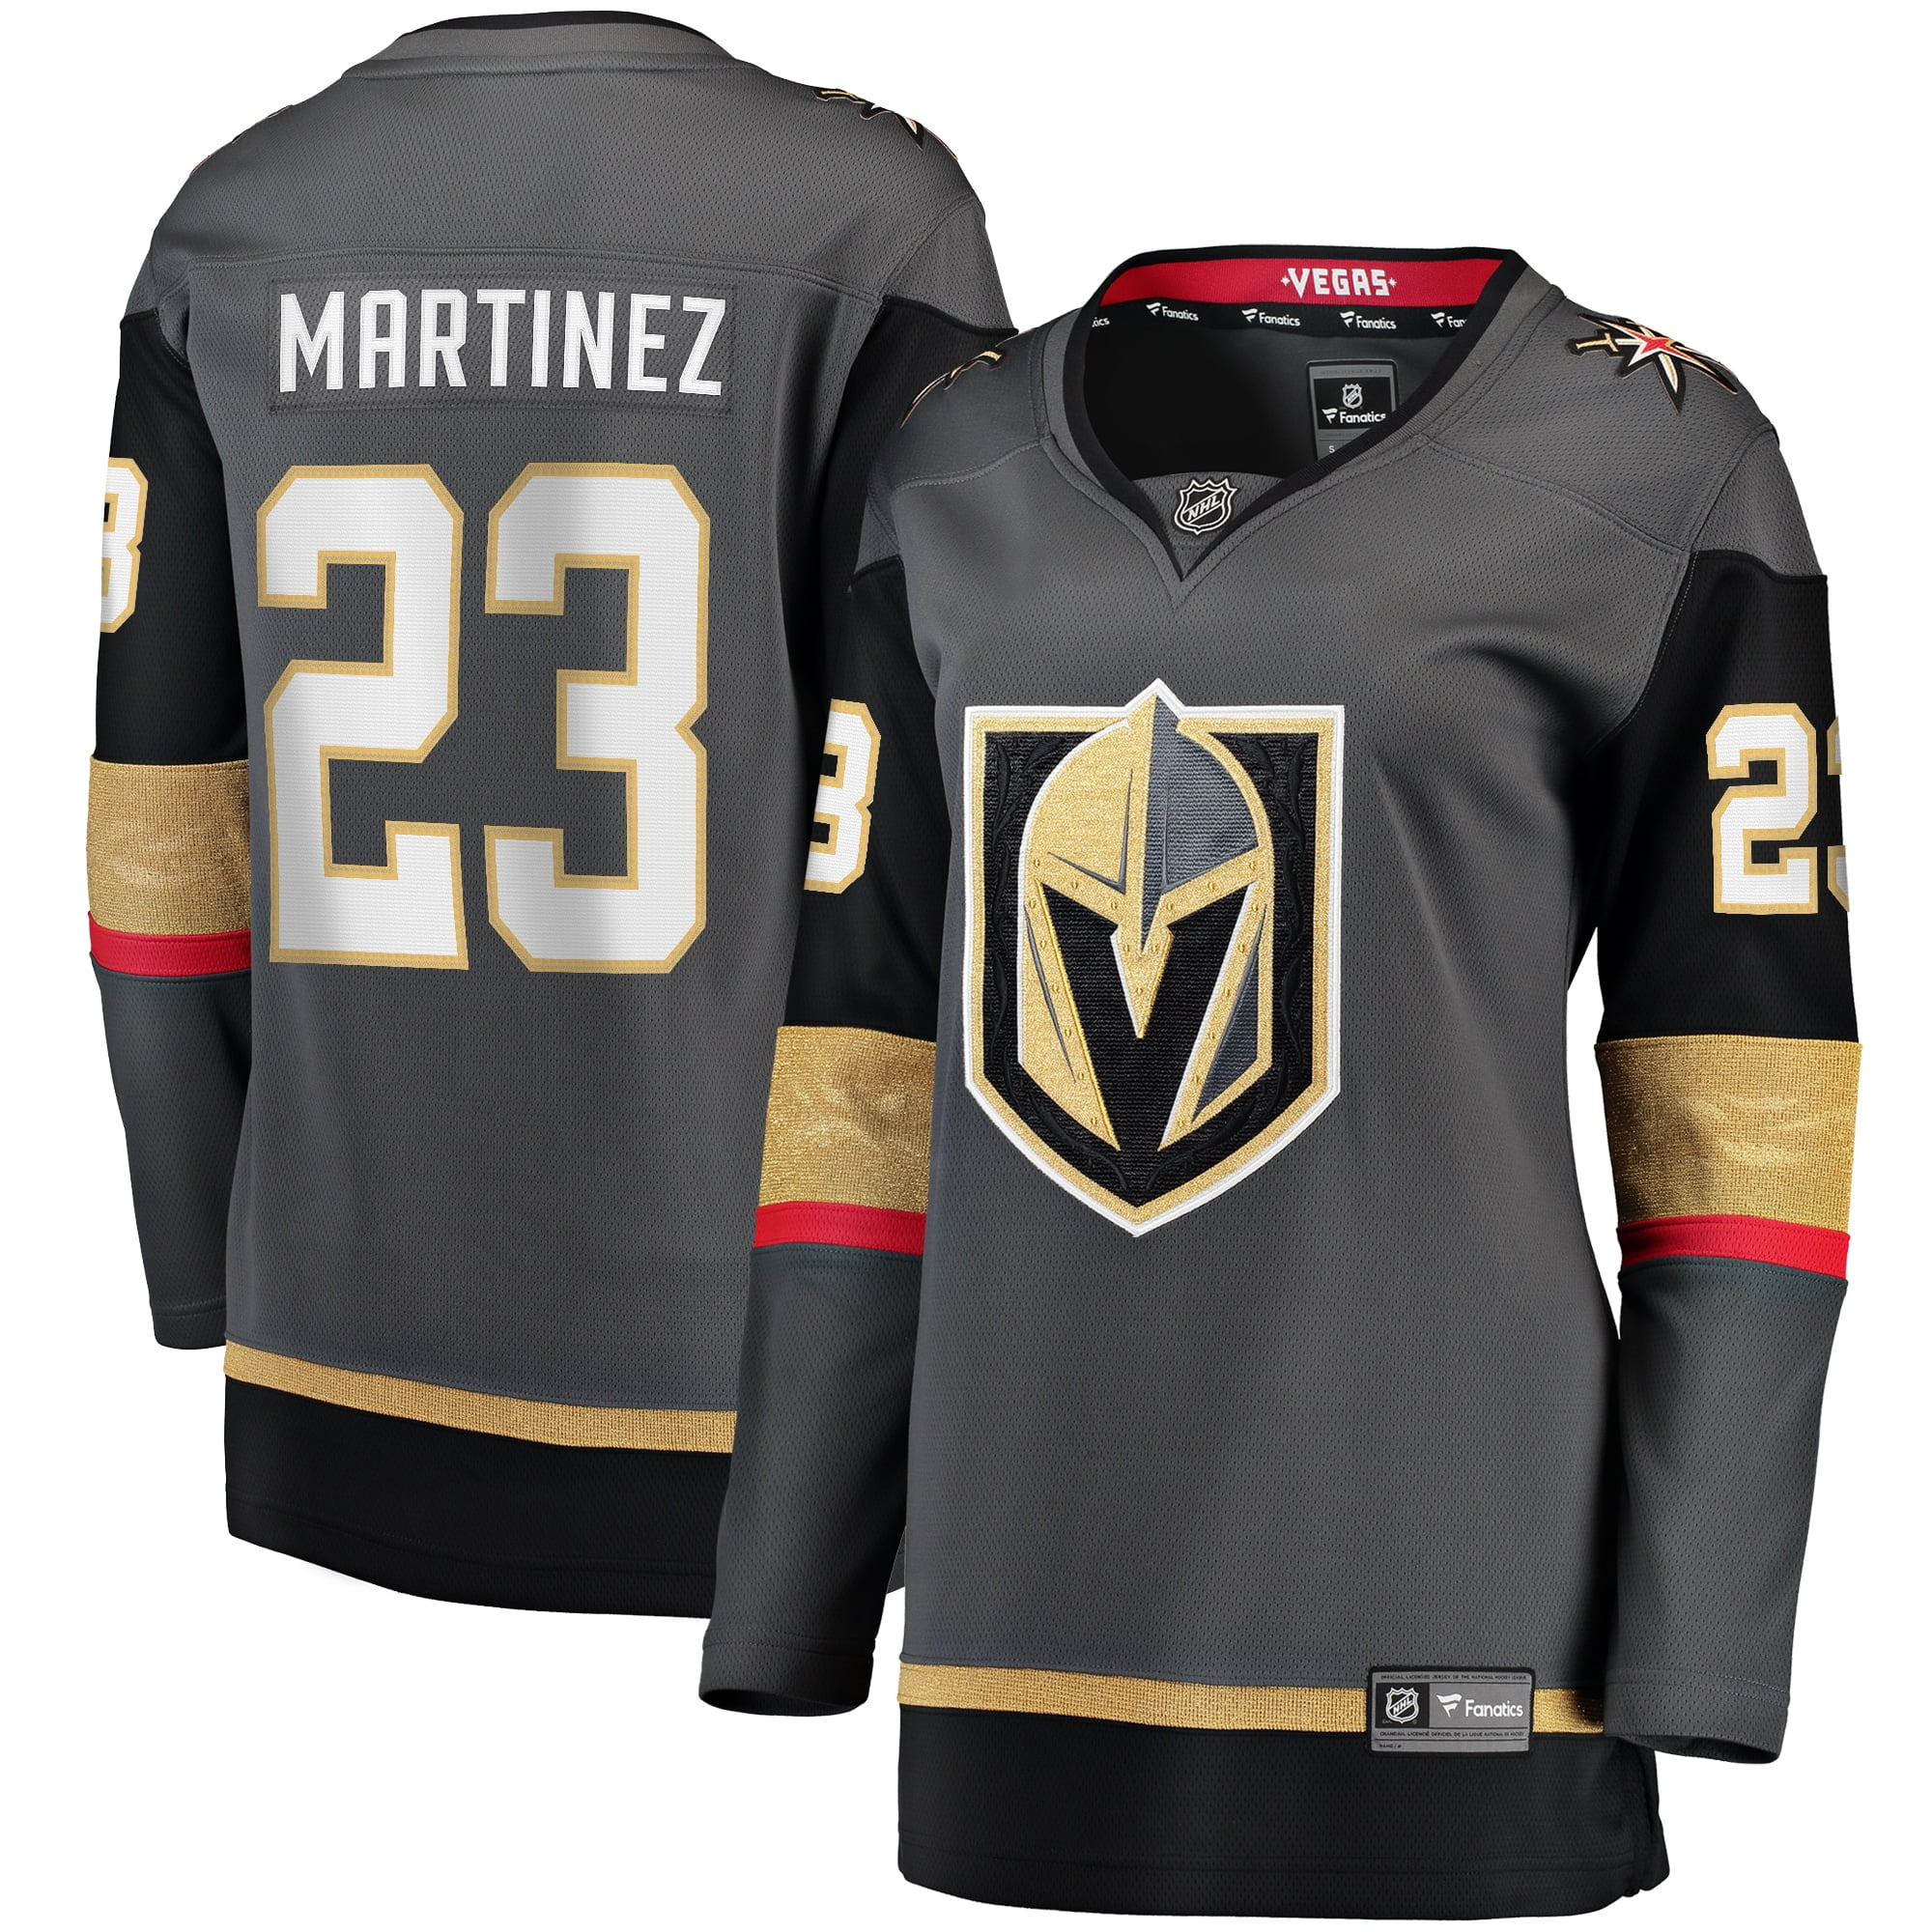 vegas golden knights jersey for sale